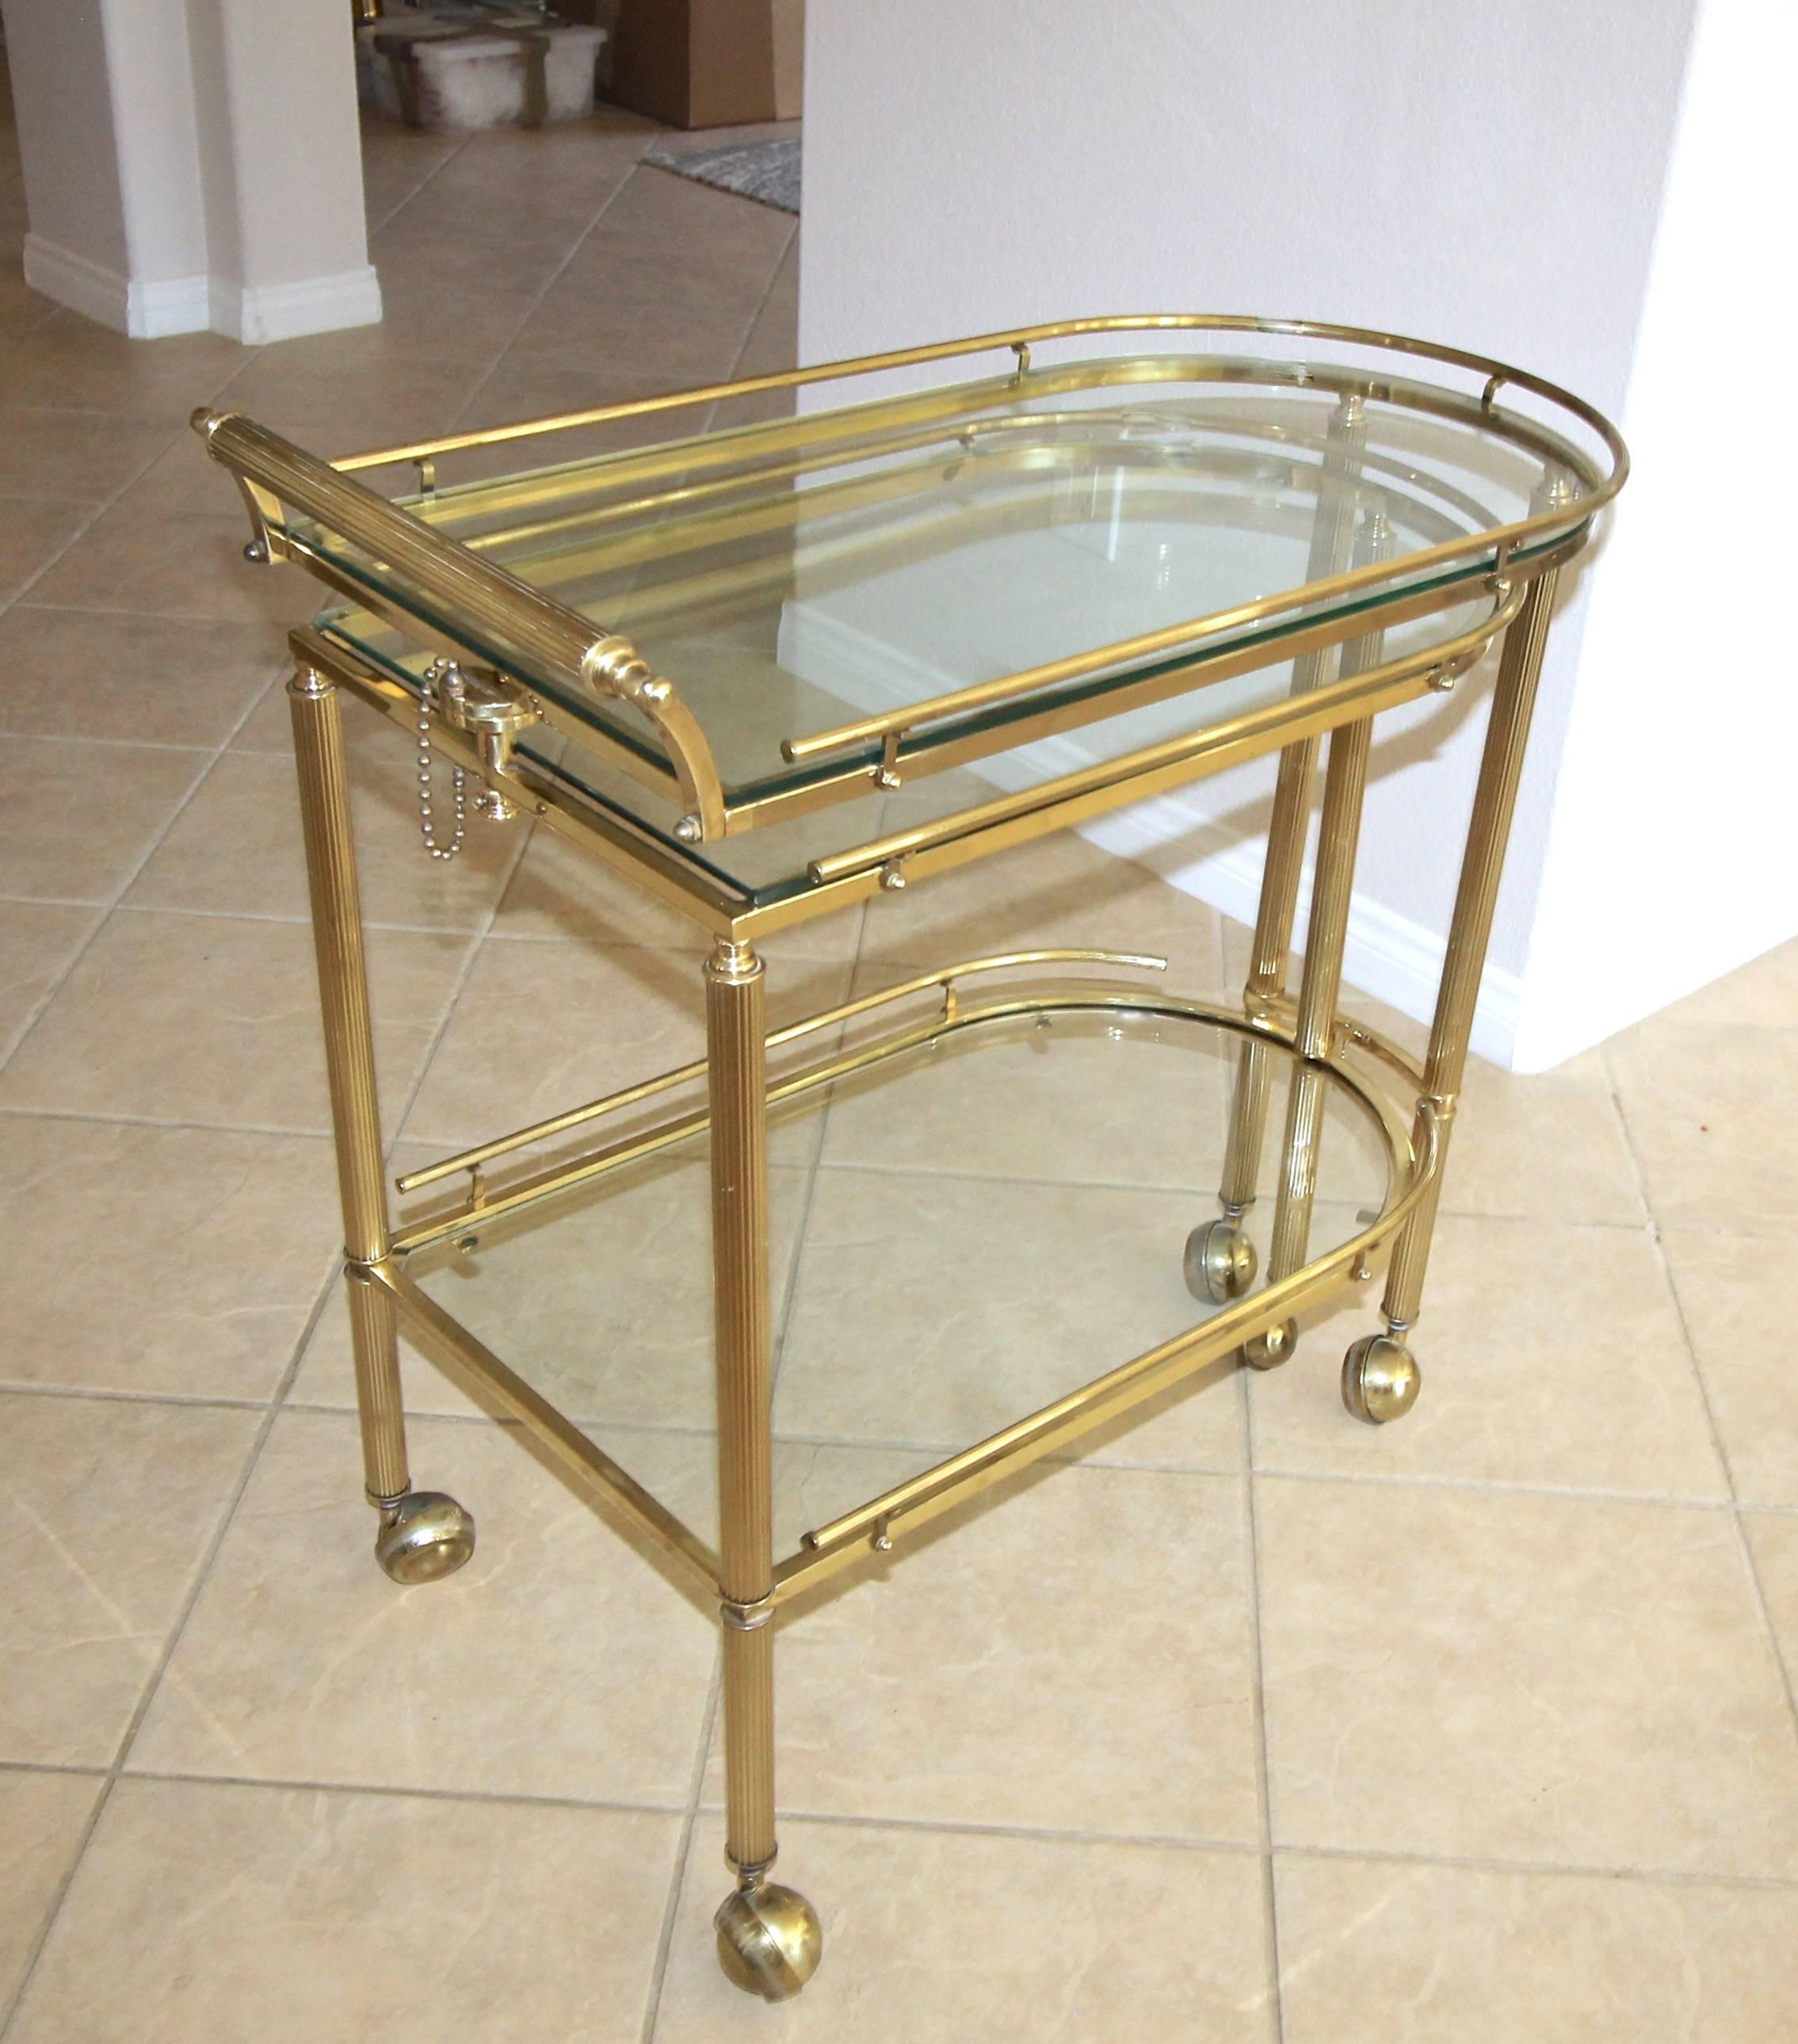 Italian three-tier brass bar or tea cart with reeded legs and glass inset tops. The bar cart swivels to open at various positions revealing three surfaces for optimum usage. Well crafted quality piece. Bar cart fully extended size 53.75